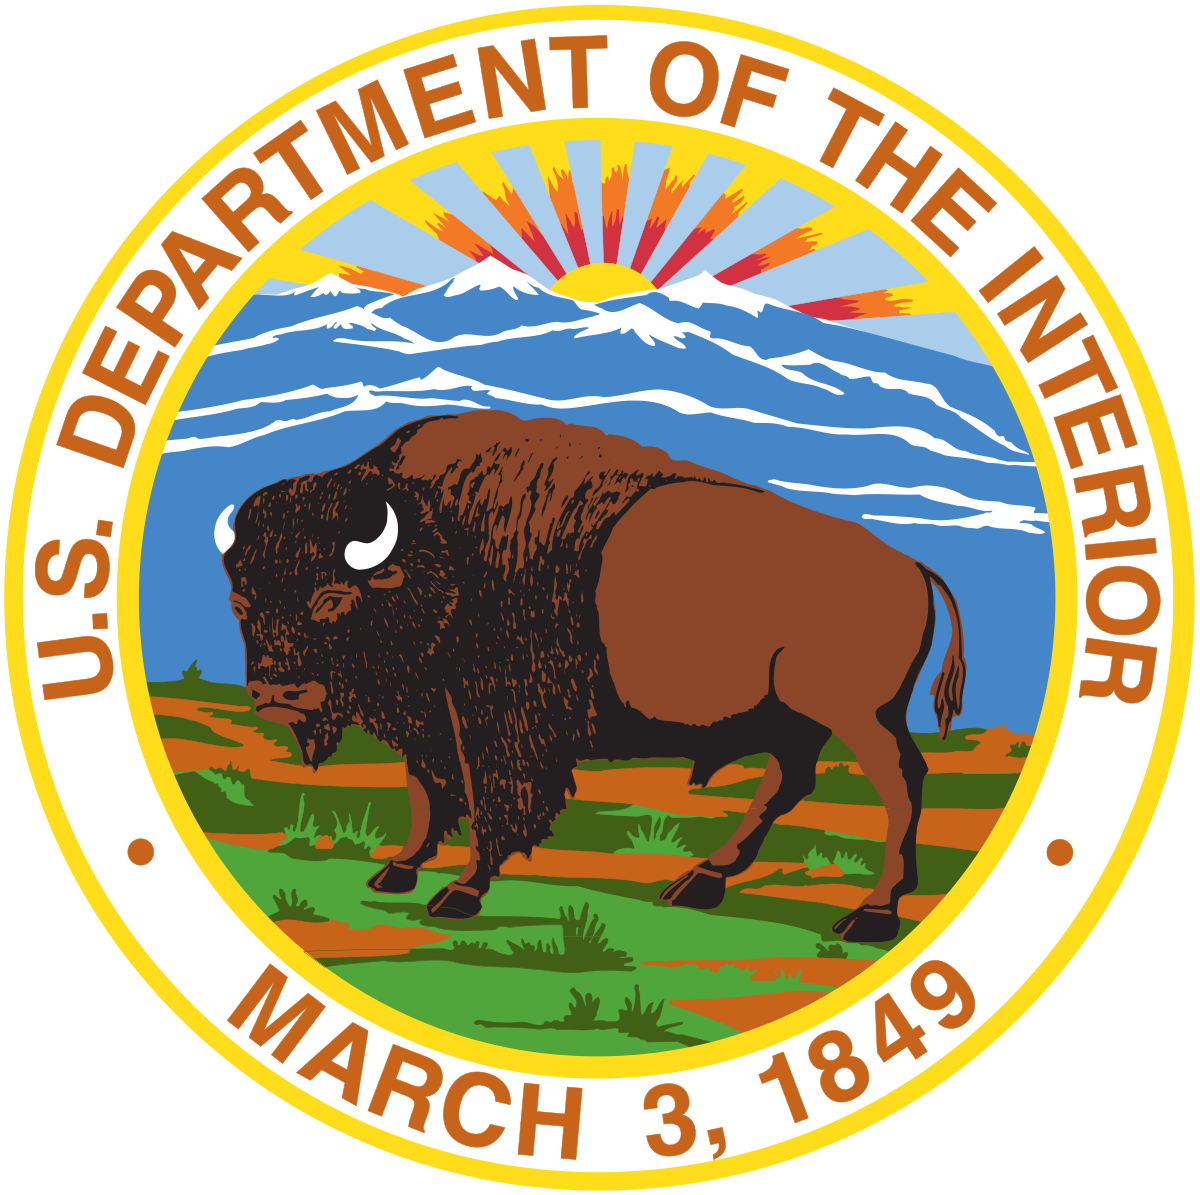 Interior Department Declined to Support Construction